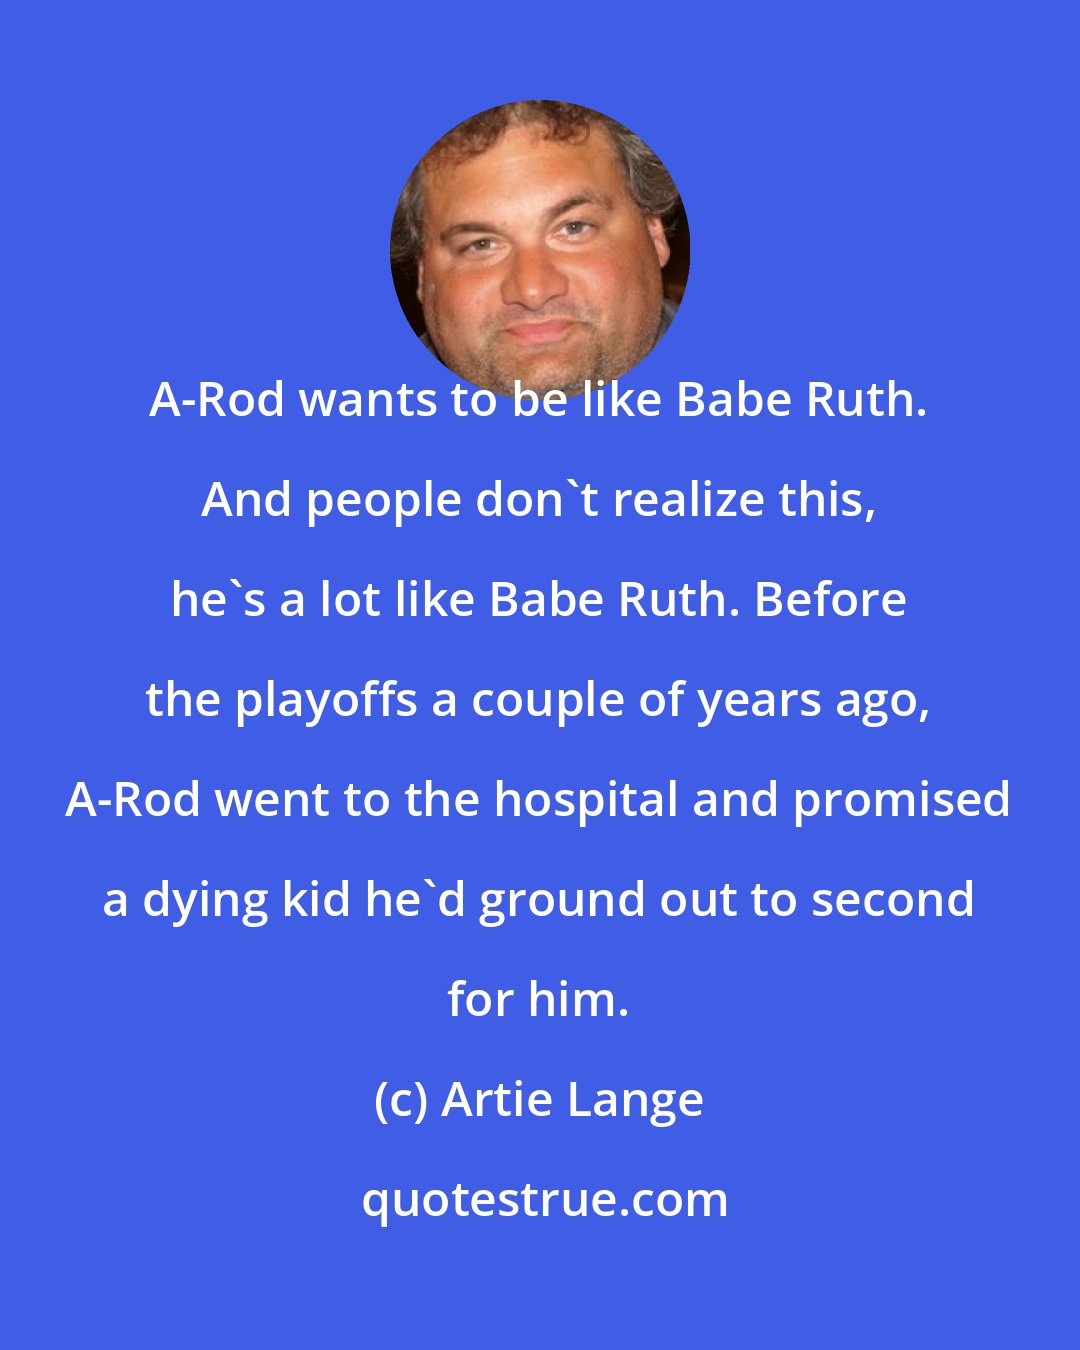 Artie Lange: A-Rod wants to be like Babe Ruth. And people don't realize this, he's a lot like Babe Ruth. Before the playoffs a couple of years ago, A-Rod went to the hospital and promised a dying kid he'd ground out to second for him.